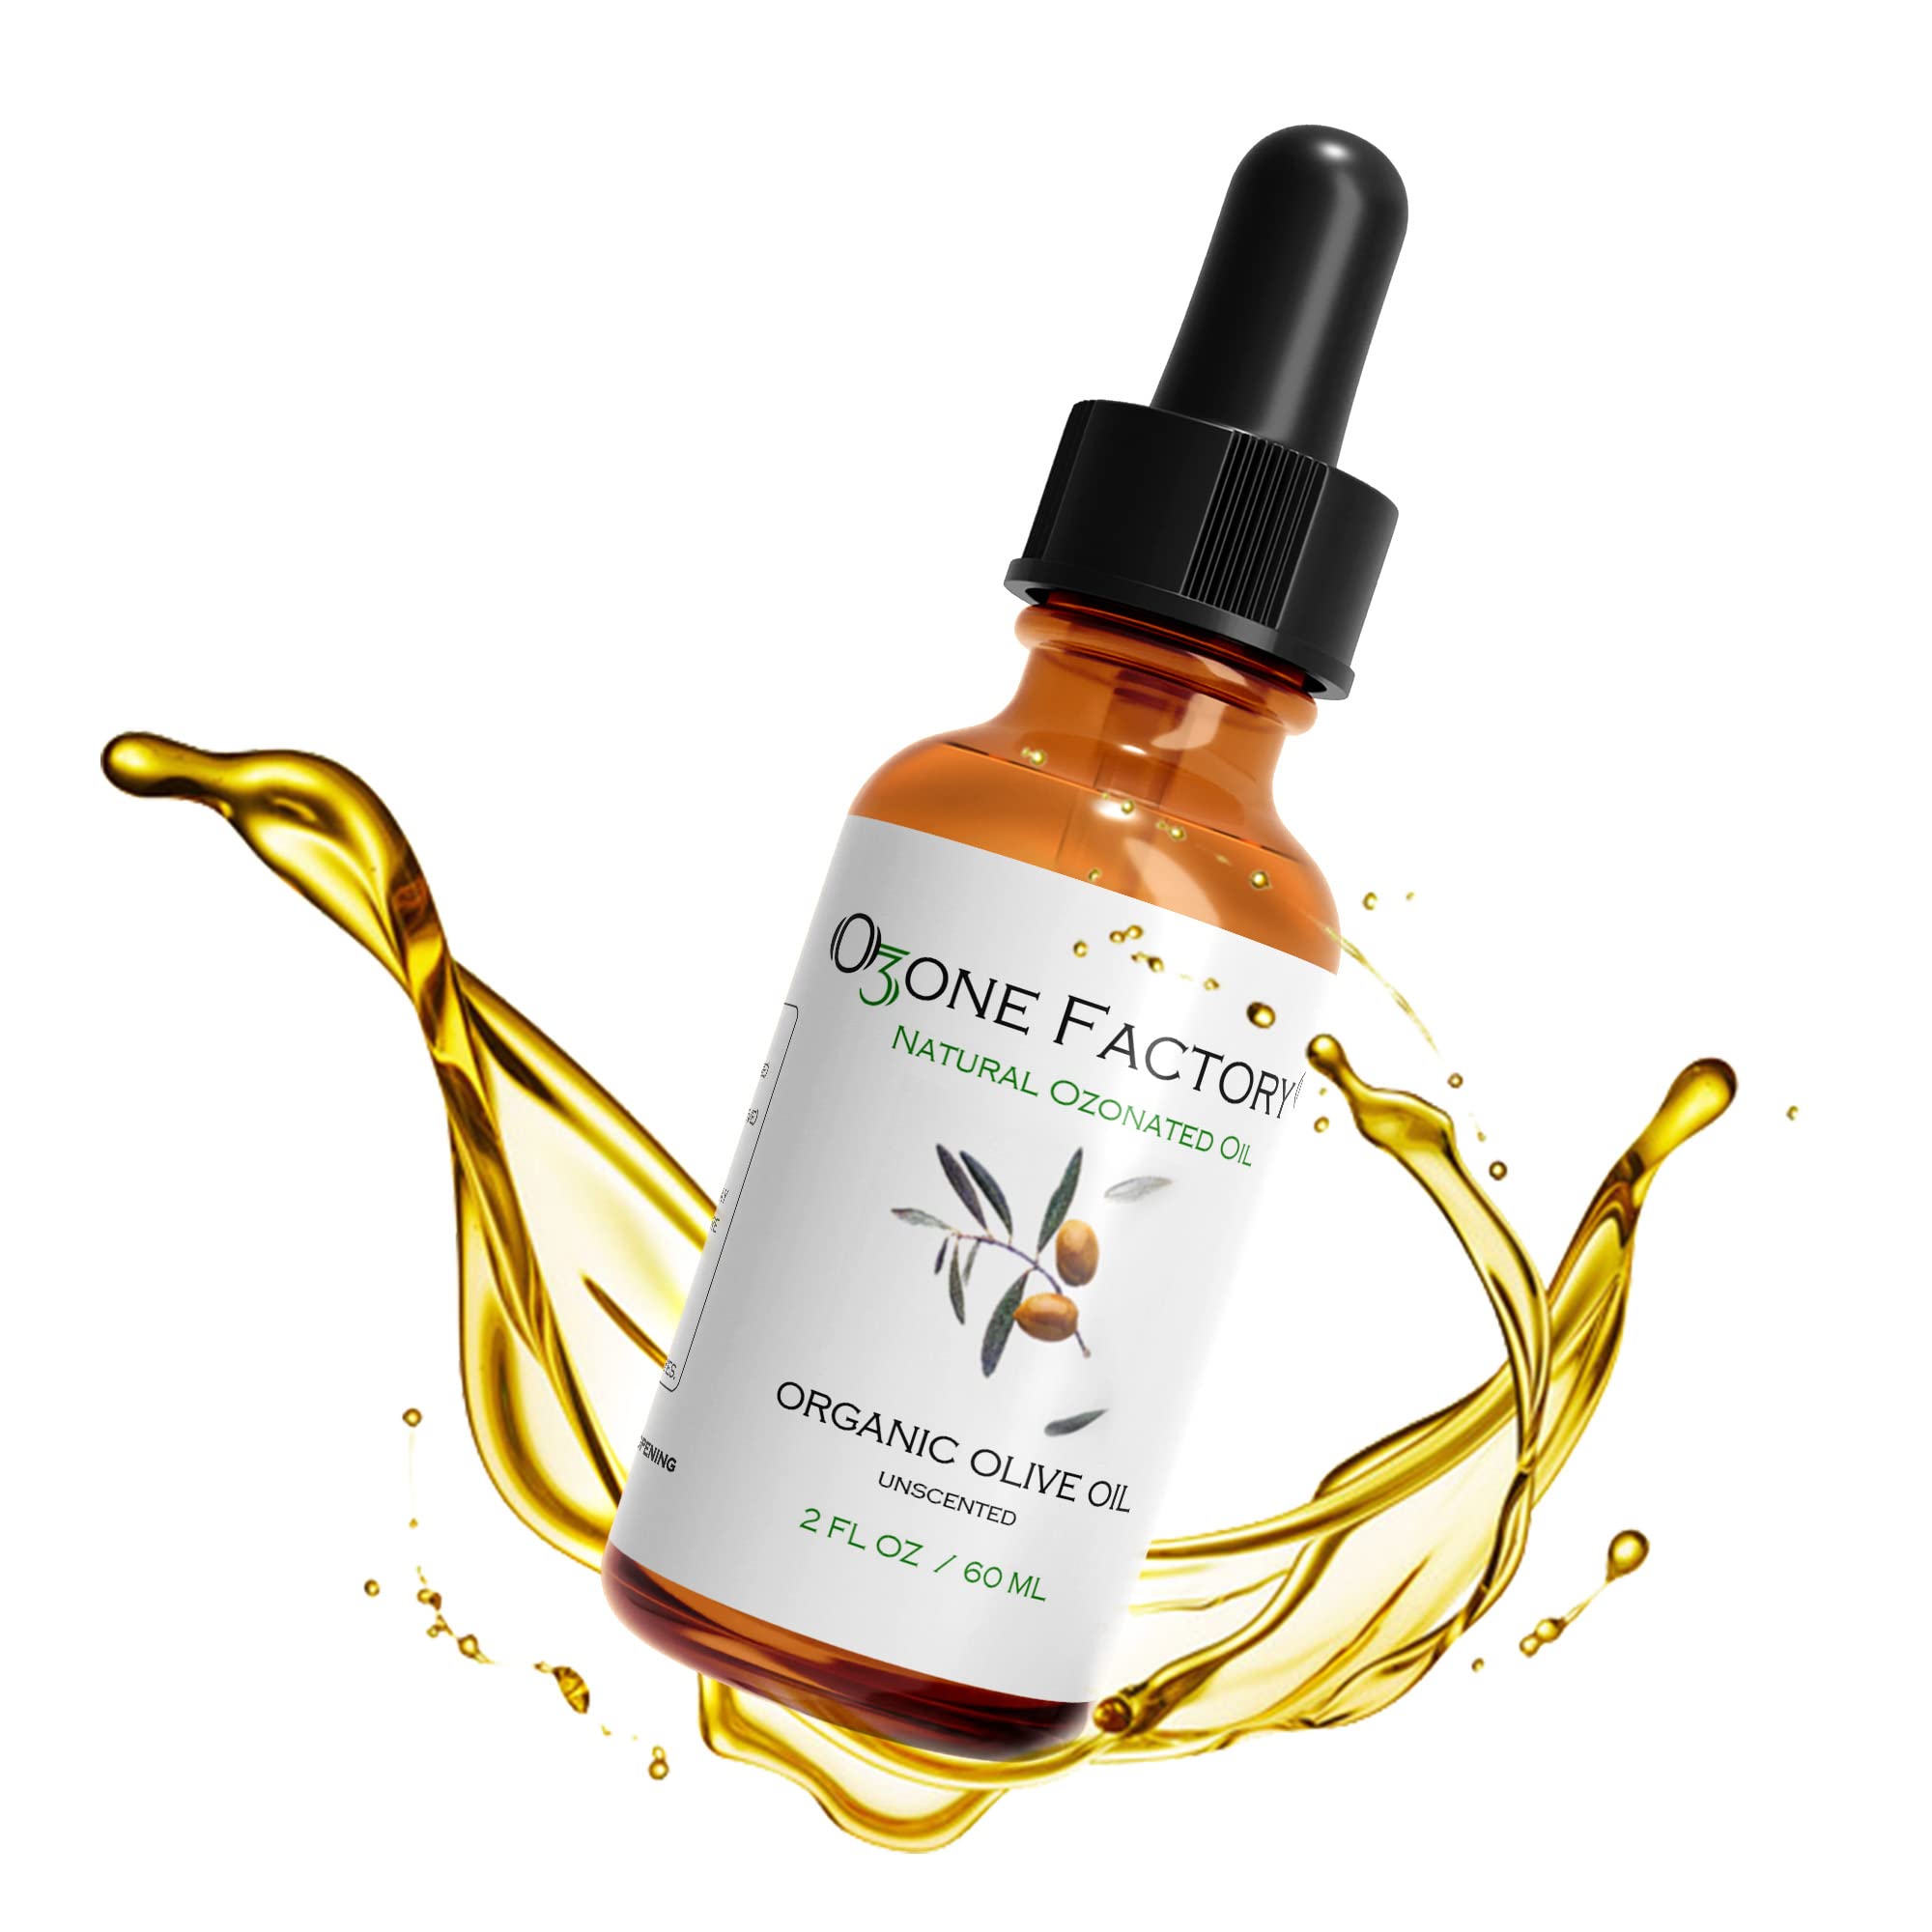 Ozone Factory Ozonated Olive Oil Unscented and Natural Face Oil